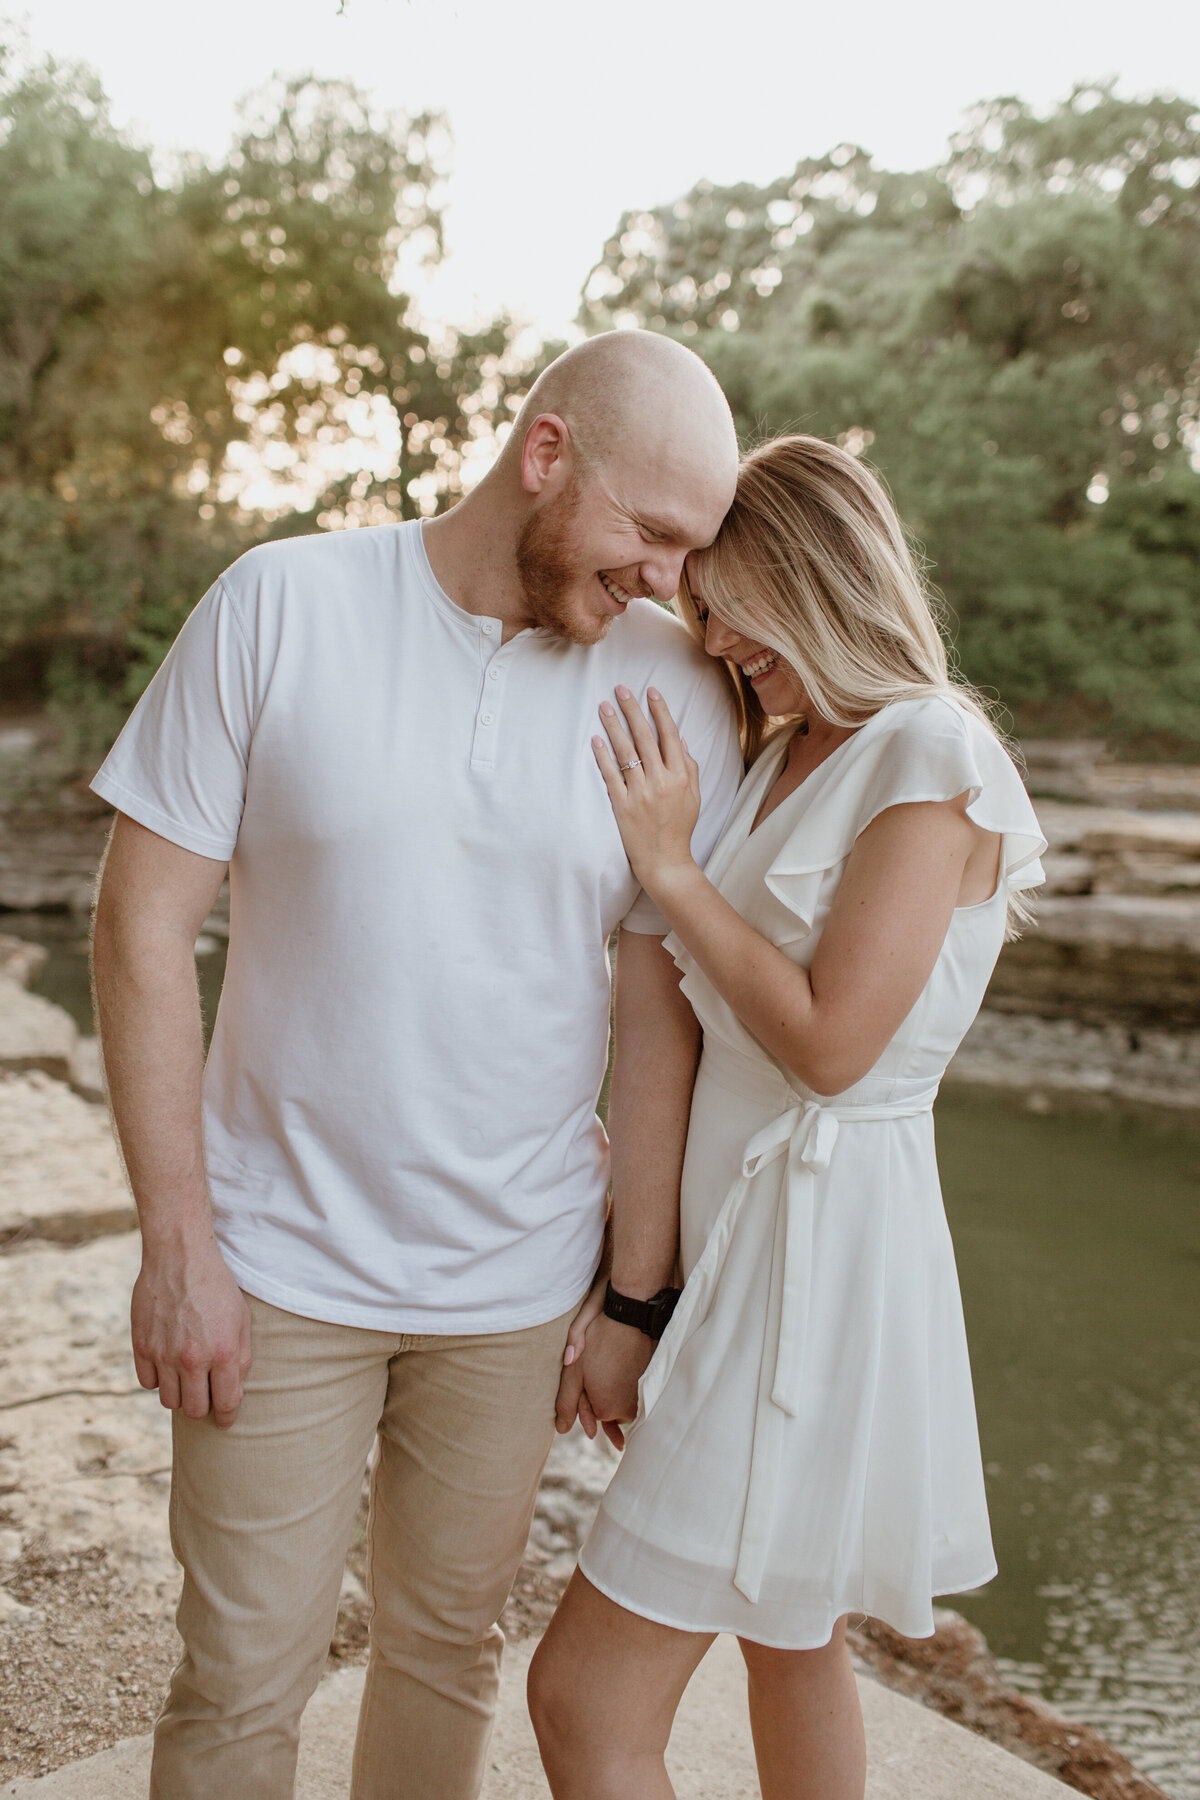 A romantic sunset moment of an engaged couple at Airfield Falls captured by Fort Worth Wedding Photographer, Megan Christine Studio